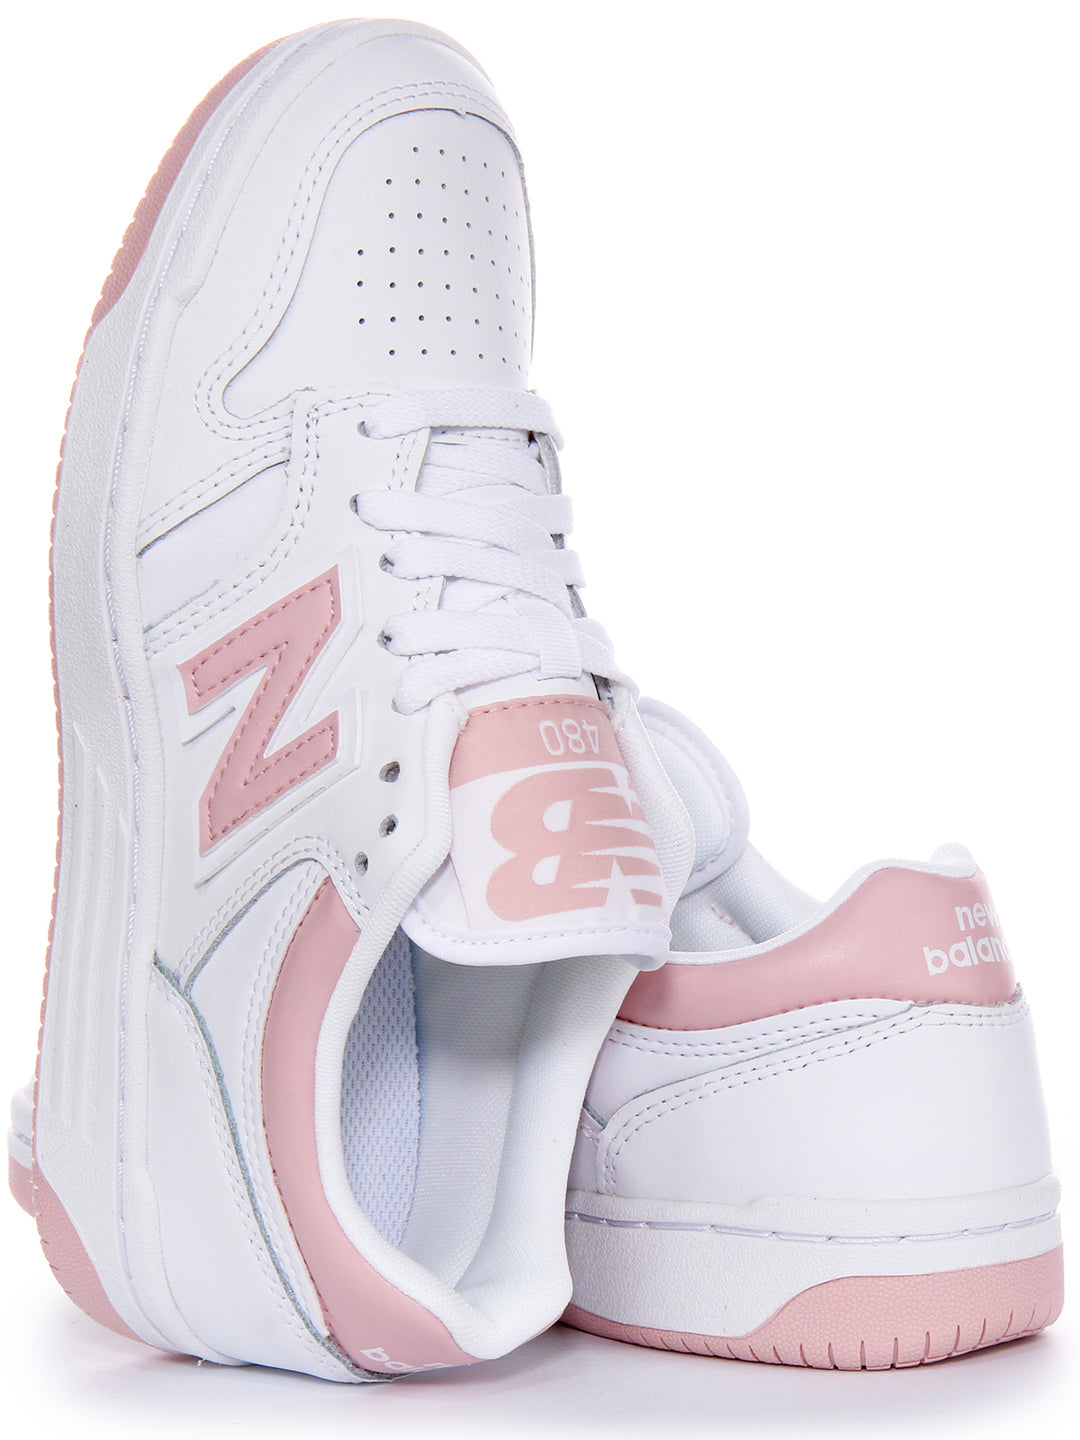 New Balance BB 480 LOP Trainers In White Pink